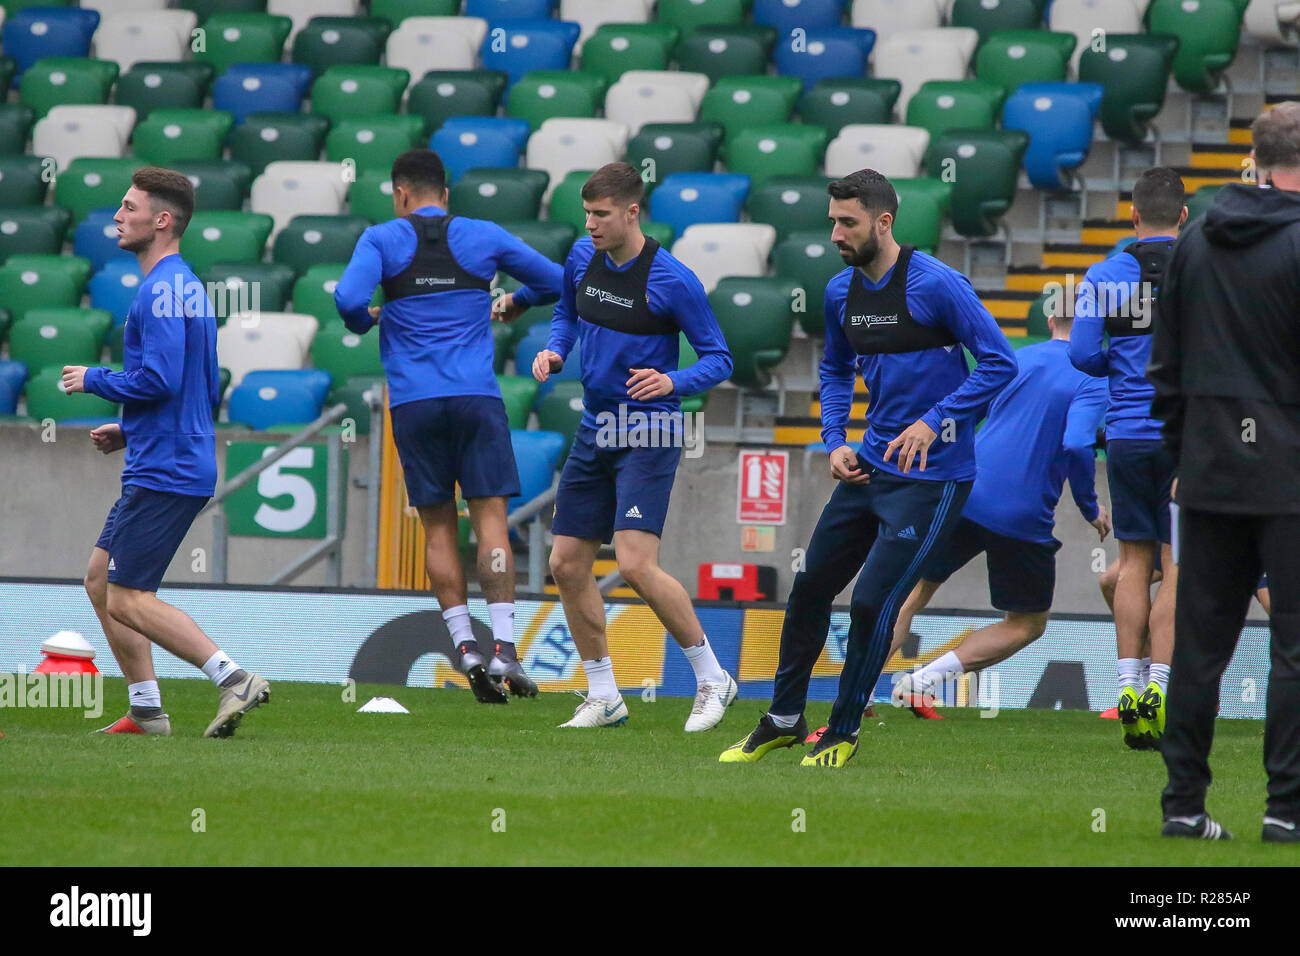 Windsor Park, Belfast, Northern Ireland.17 November 2018. Northern Ireland training in Belfast this morning ahead of their UEFA Nations League game against Austria tomorrow night in the stadium.  Paddy McNair (l) and Conor McLaughlin. Credit: David Hunter/Alamy Live News. Stock Photo